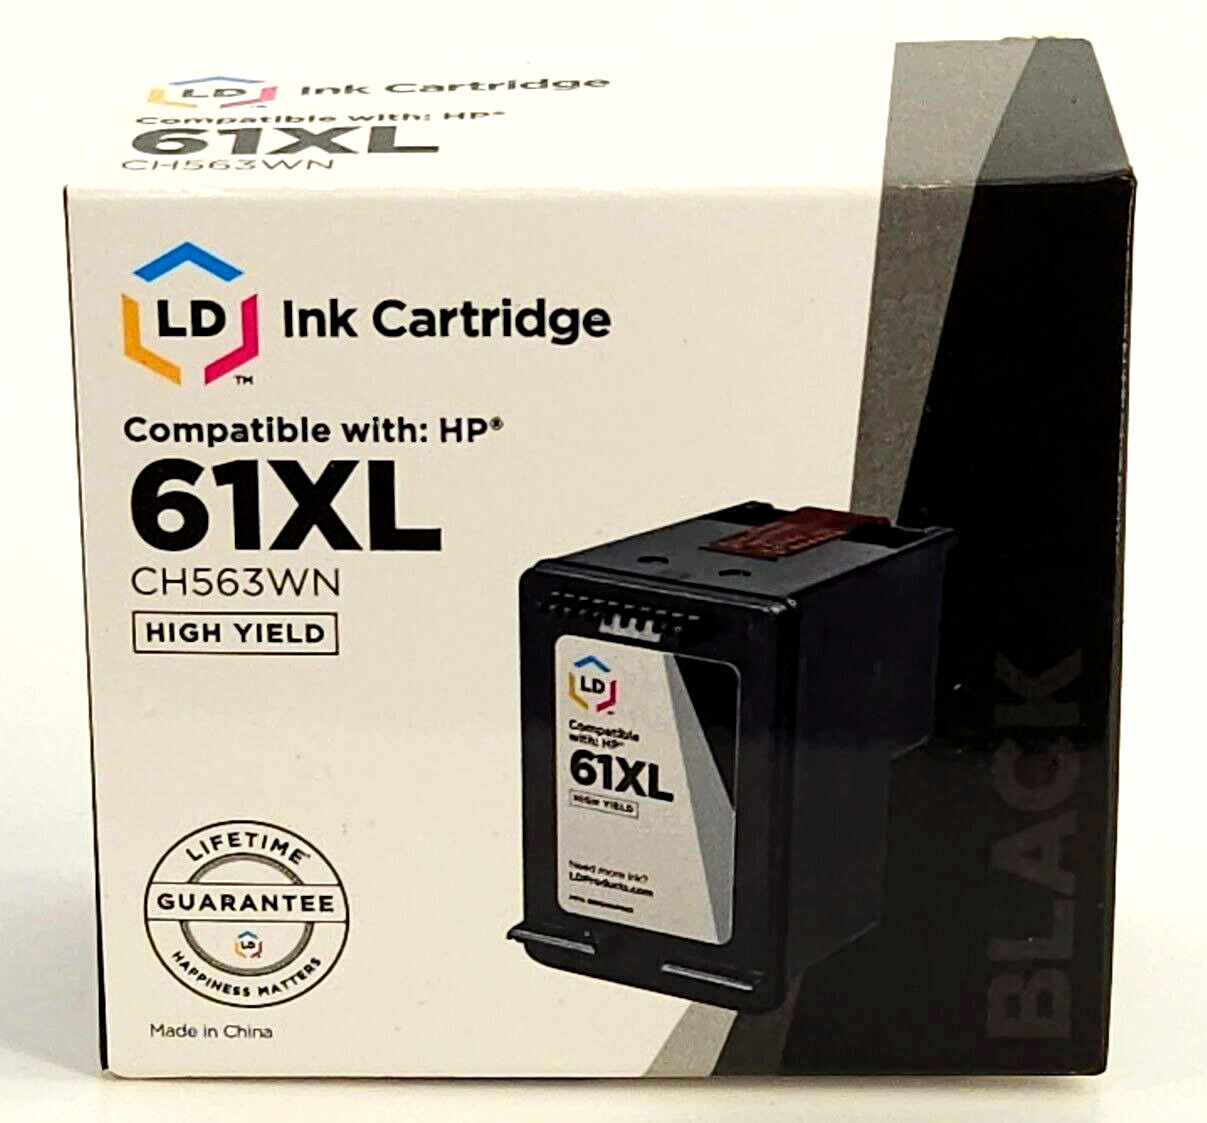 LD Ink Cartridge Desk Jet New Compatible with HP 61XL High Yield Black CH563WN